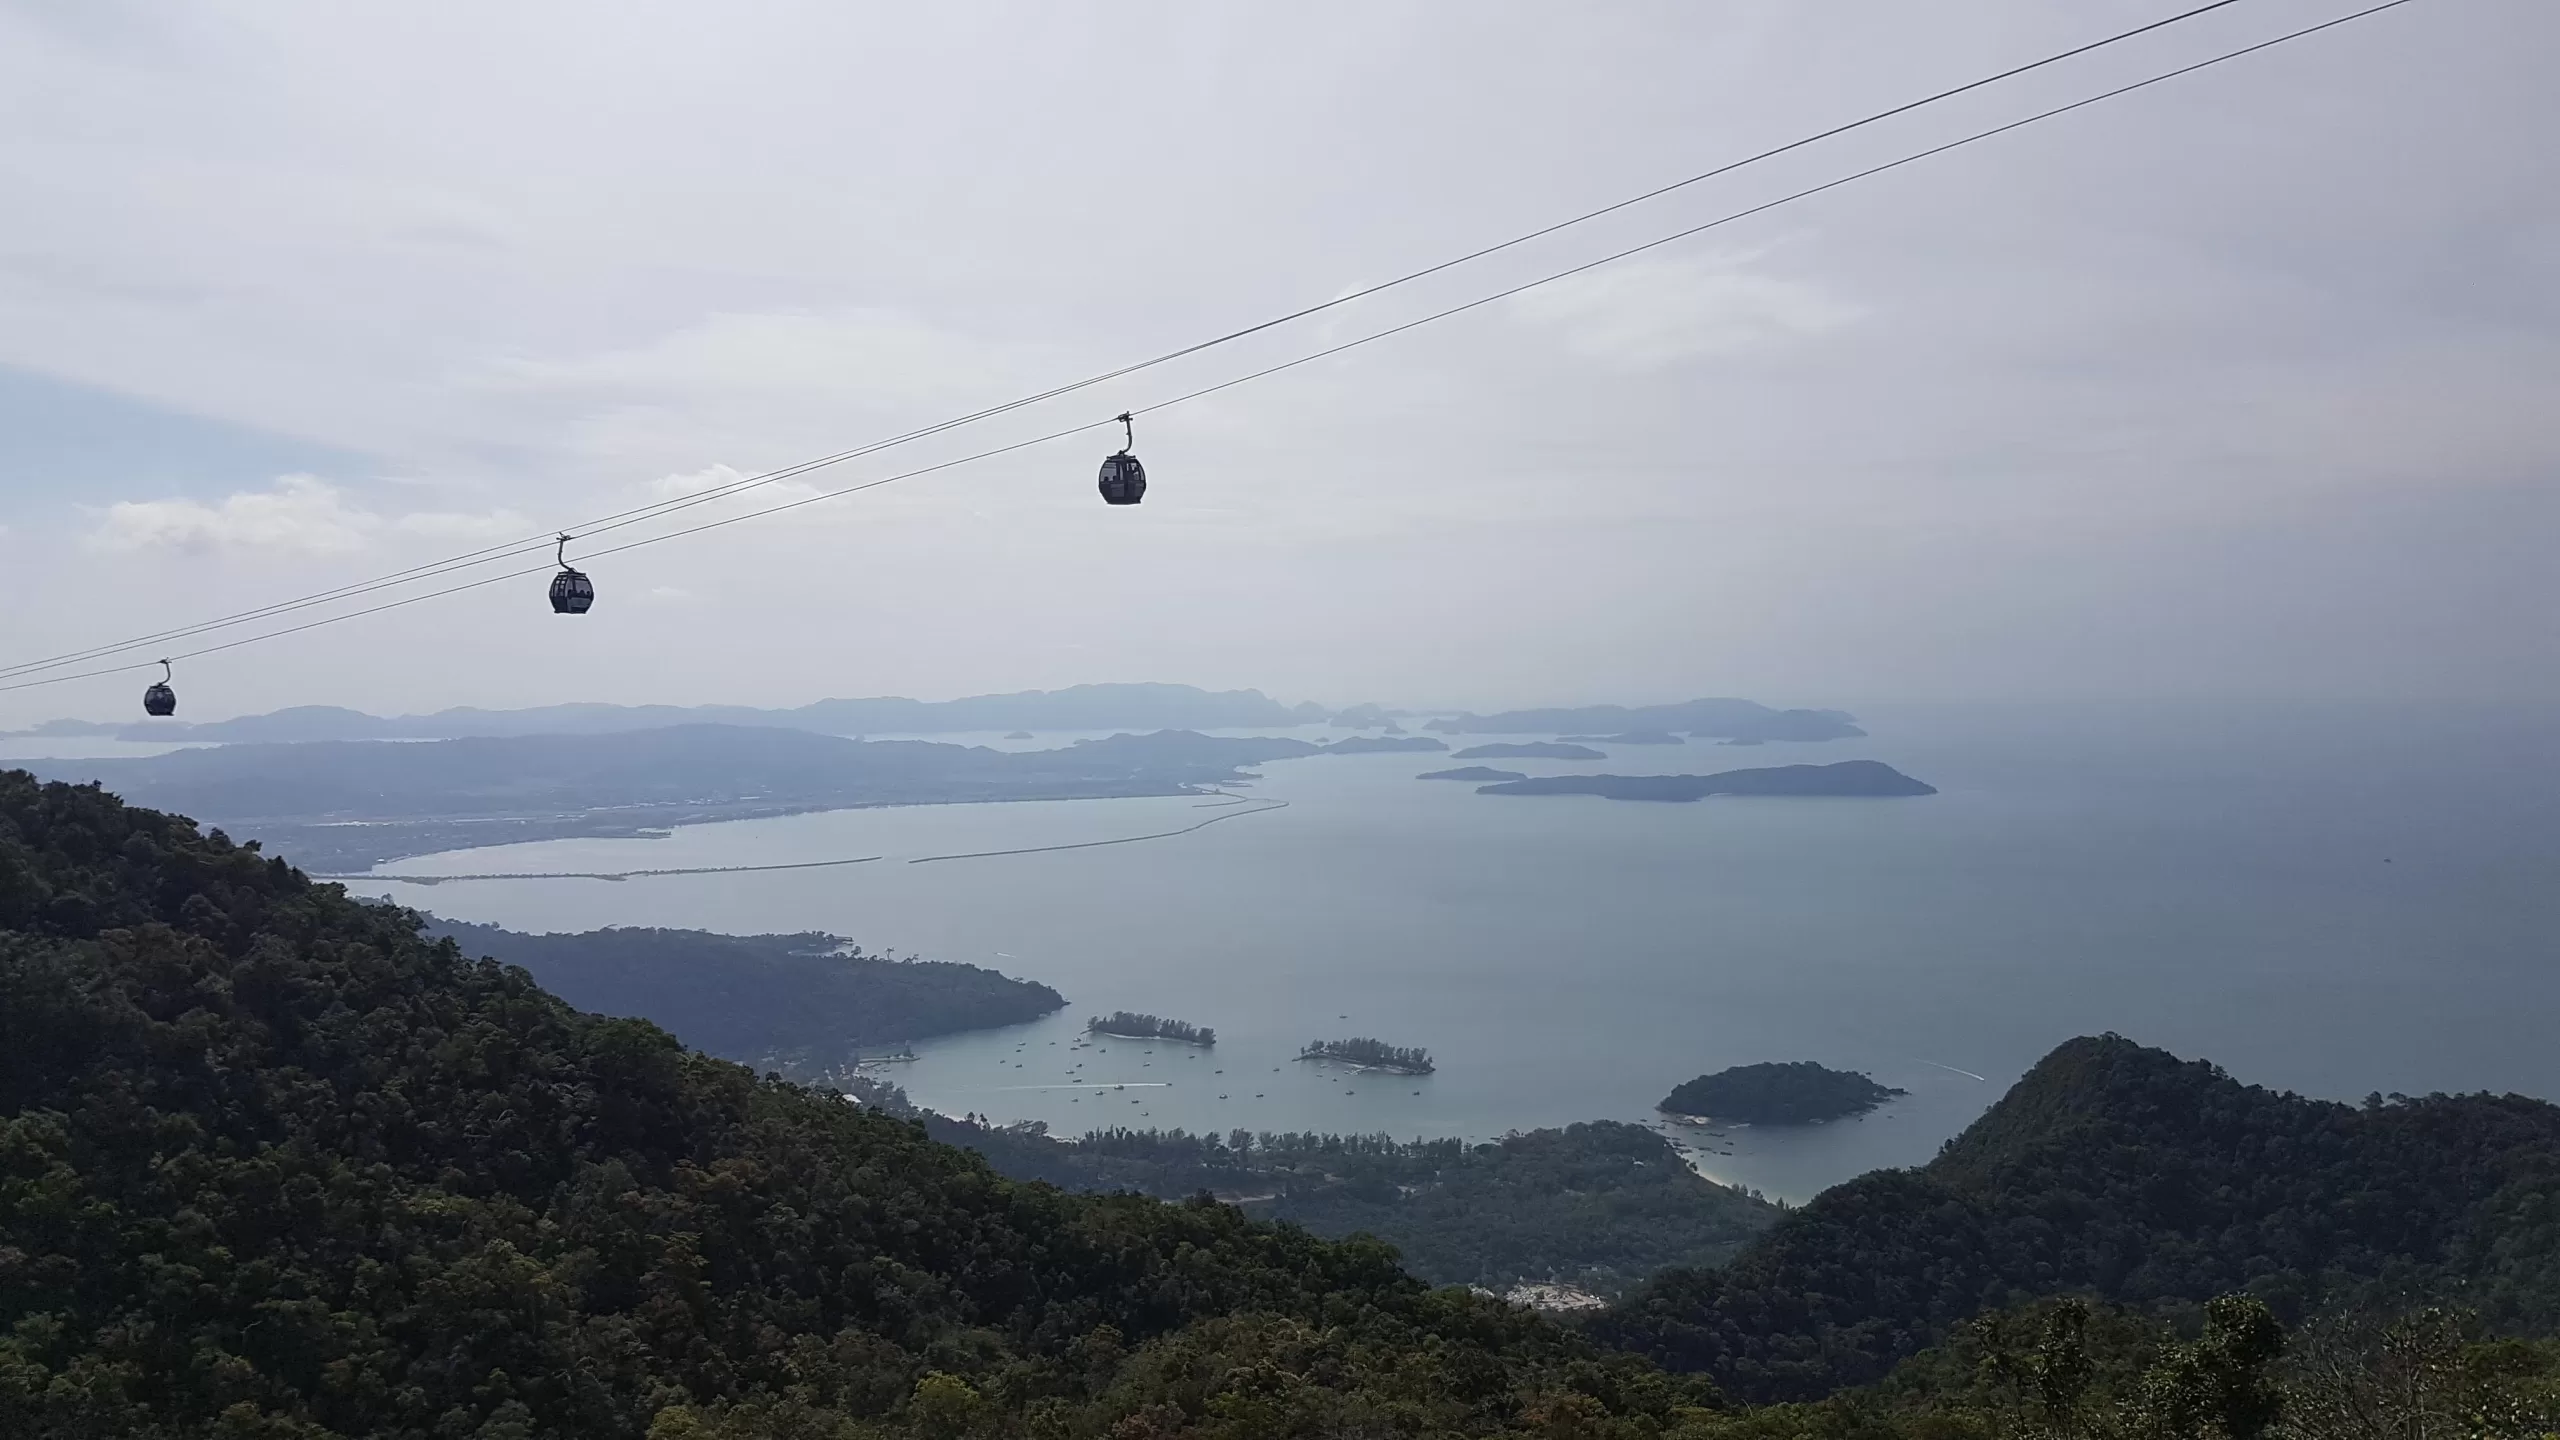 A view into the Strait of Malacca from Langkawi